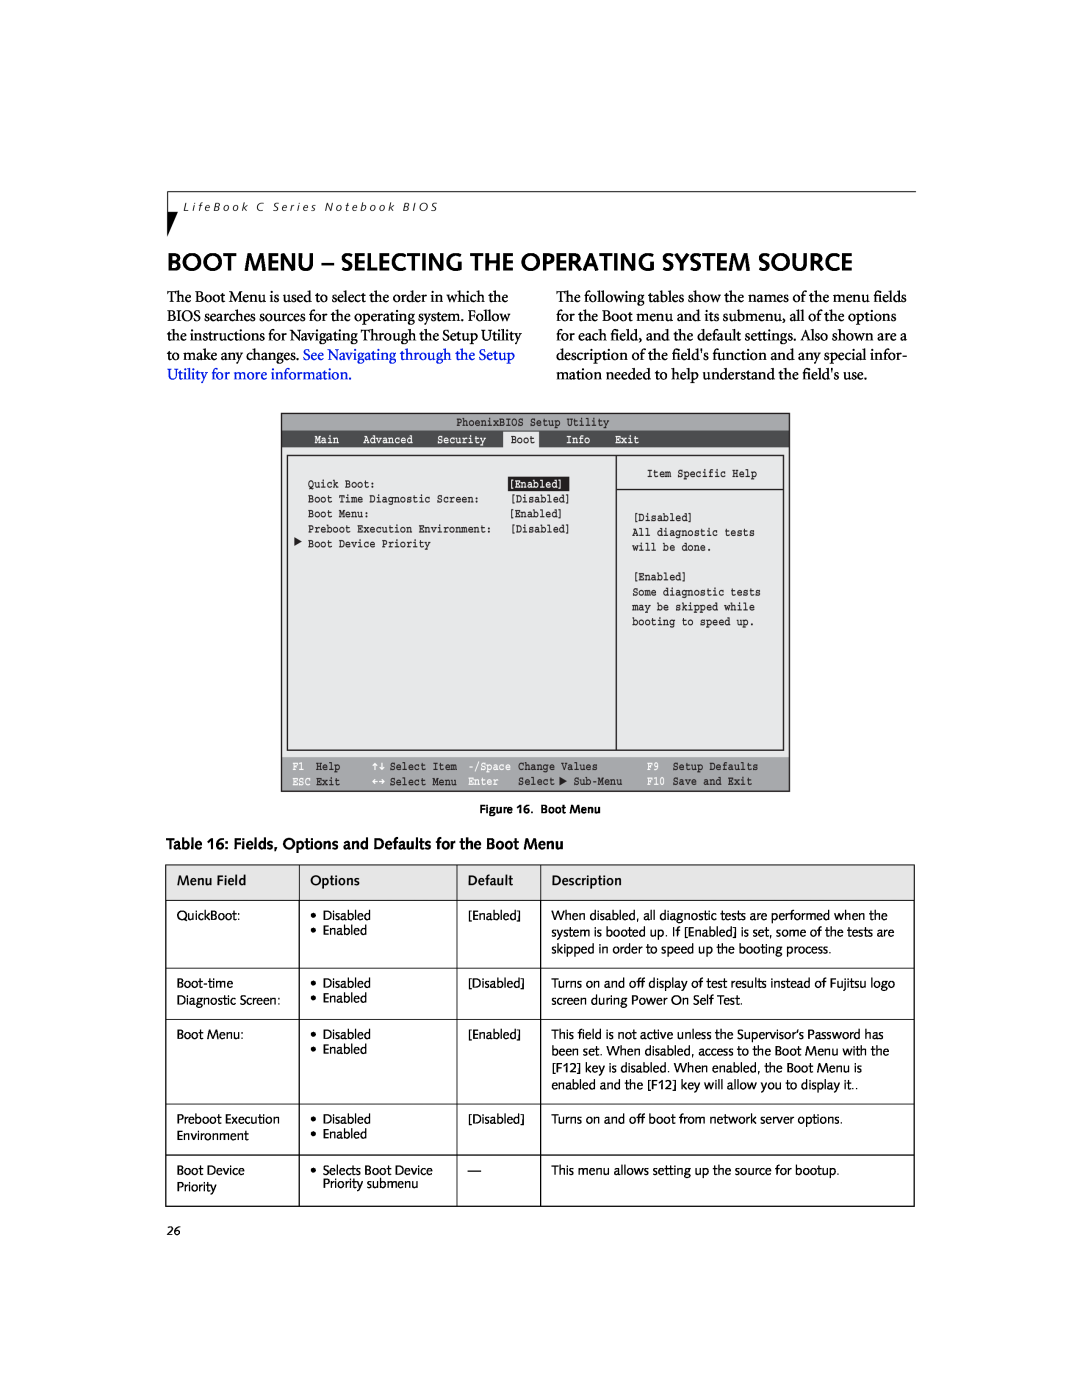 Fujitsu C2330 manual Boot Menu - Selecting The Operating System Source, Fields, Options and Defaults for the Boot Menu 